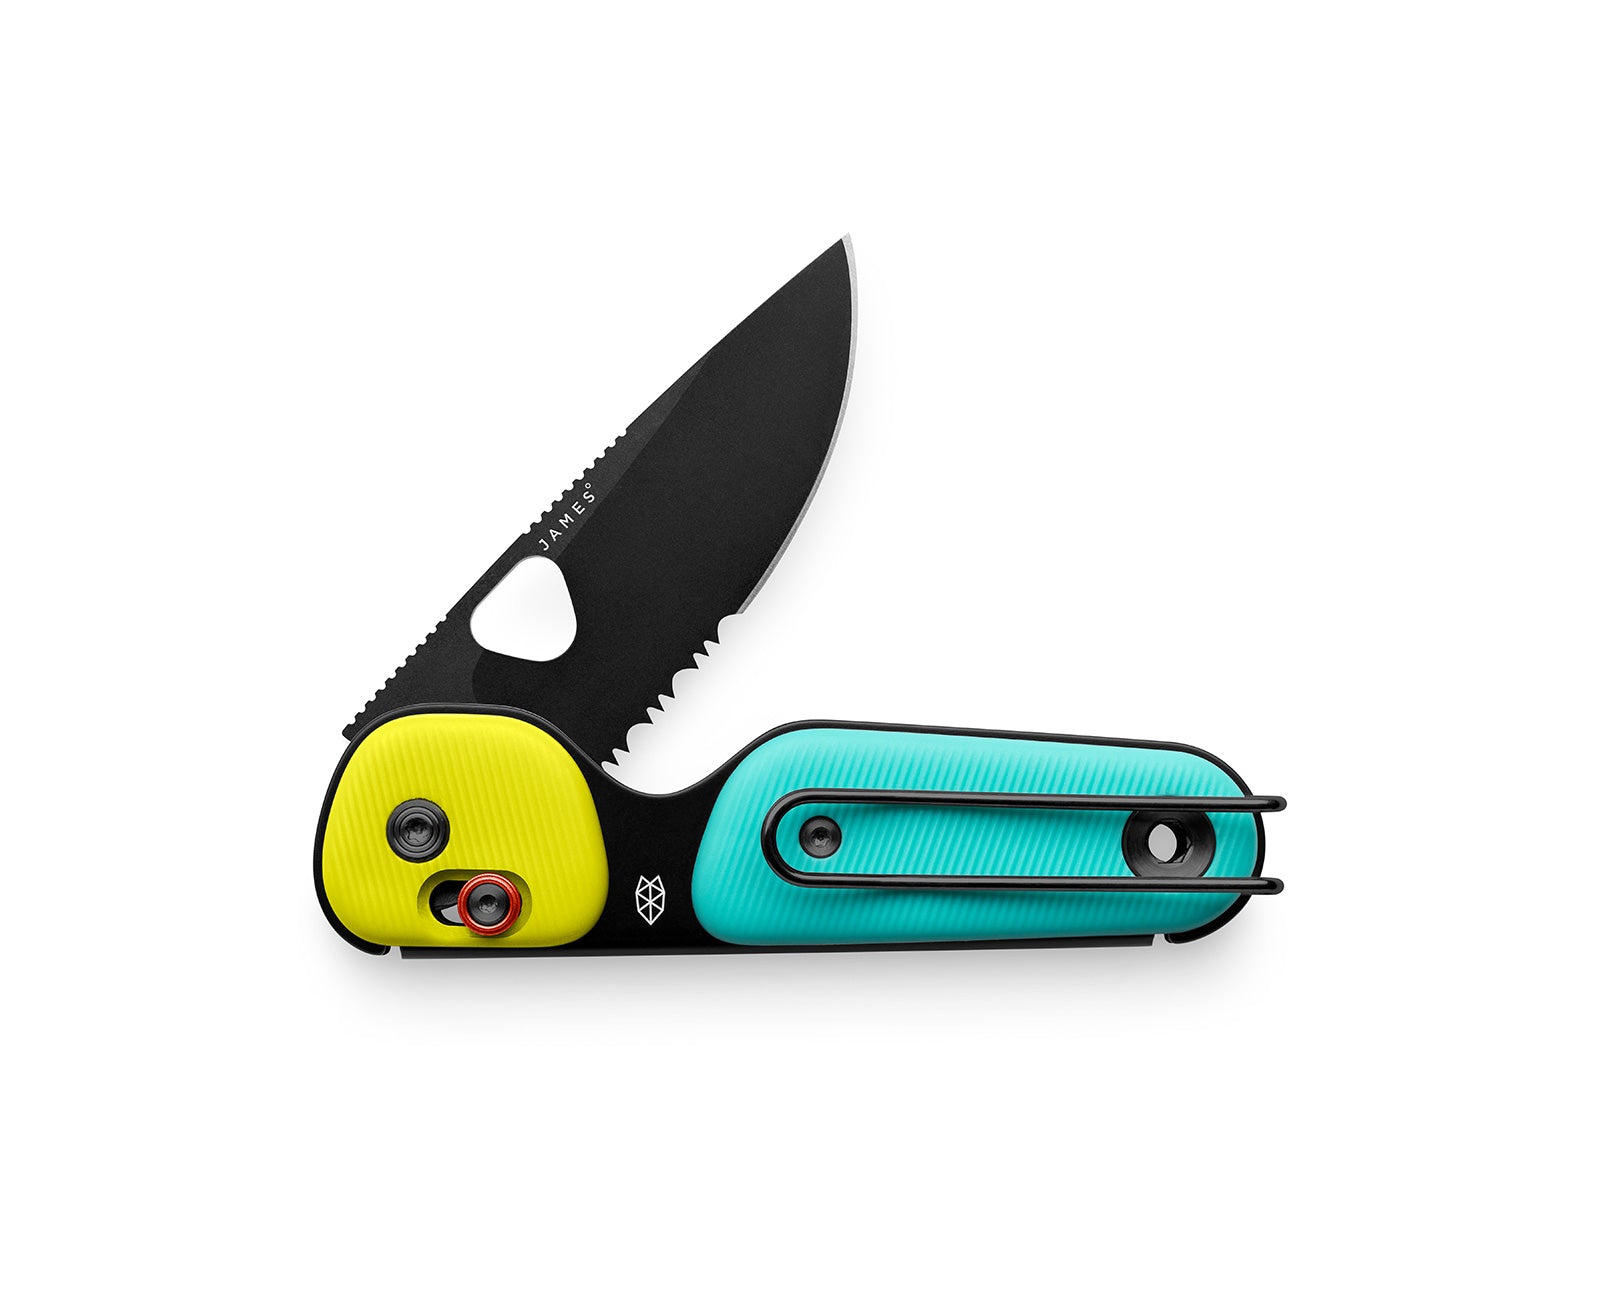 Choice 3-Piece Knife Set with Neon Blue Handles